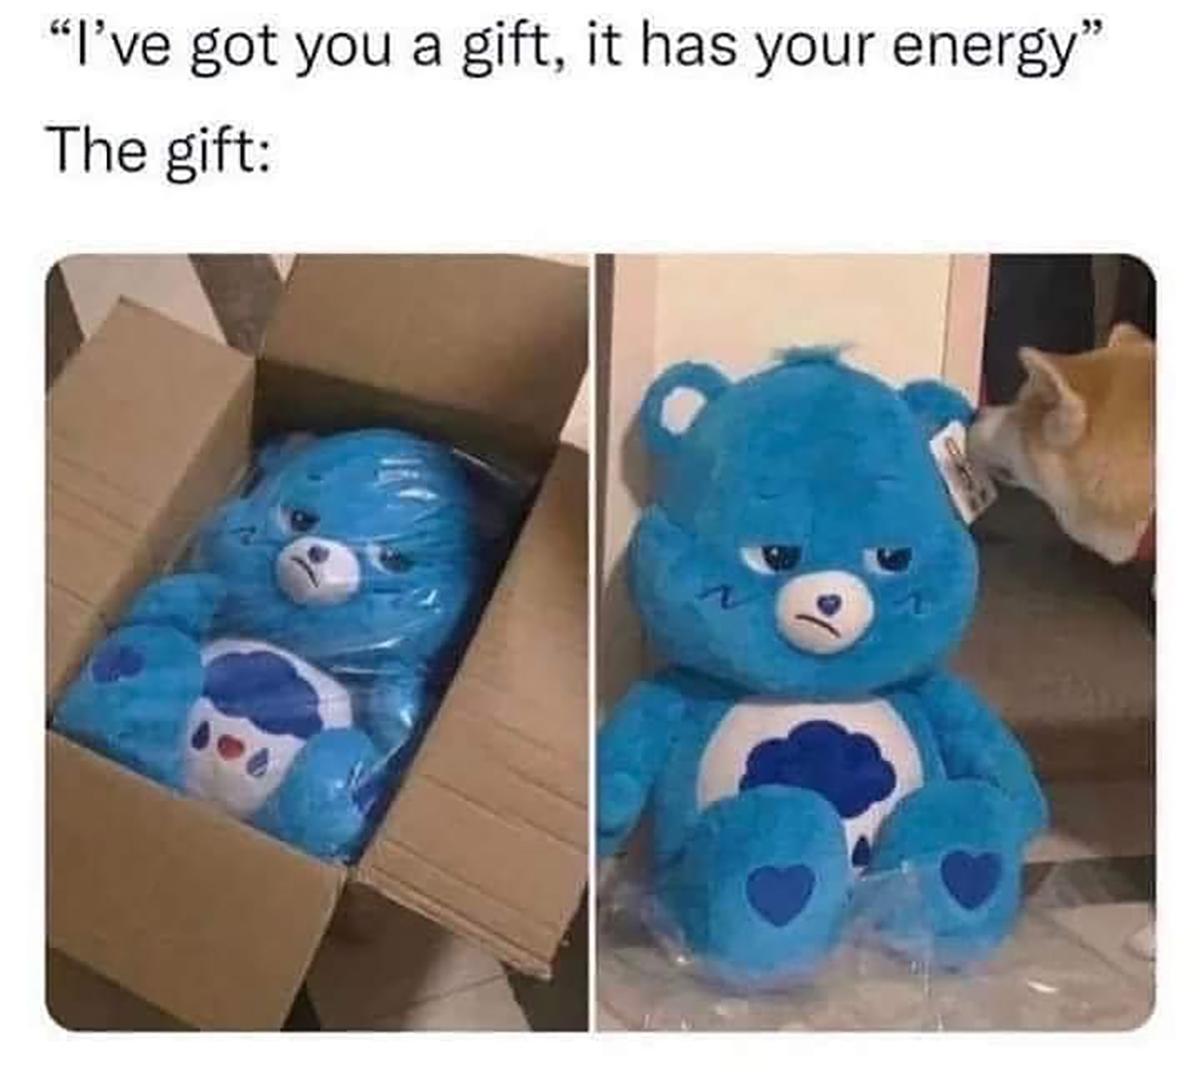 monday memes - ve got you a gift it has your energy - "I've got you a gift, it has your energy" The gift